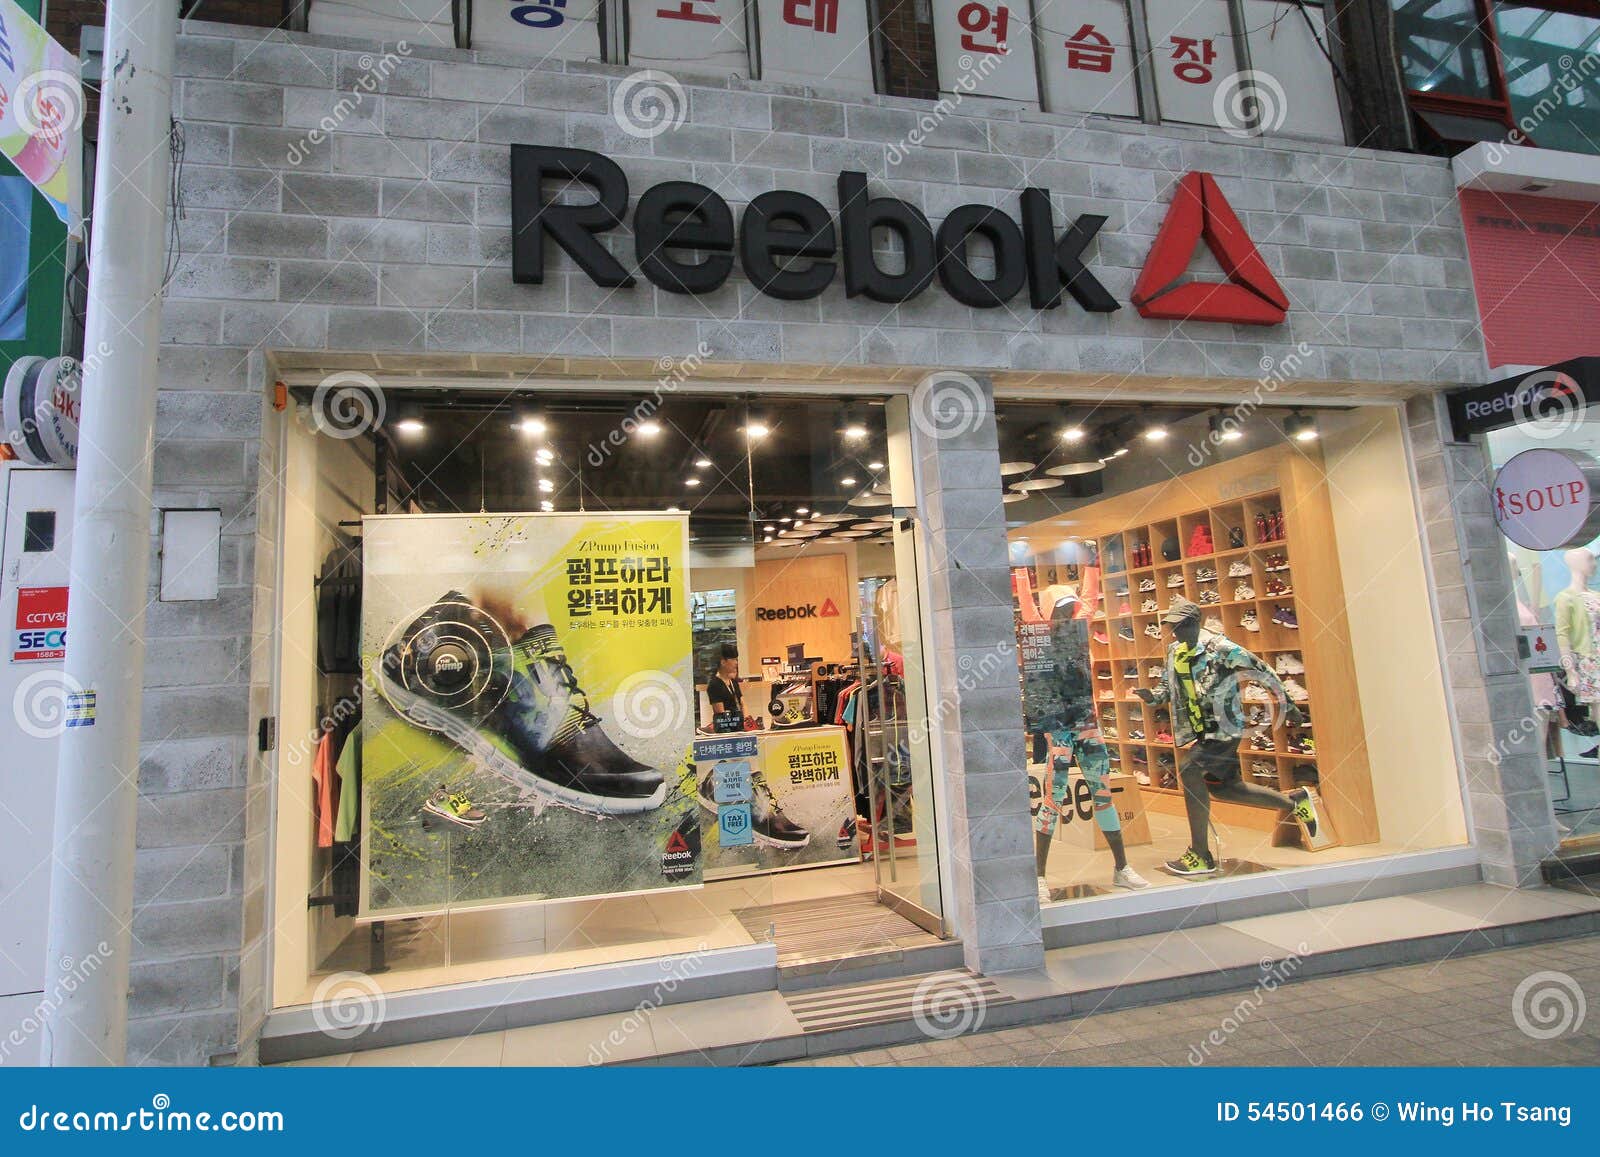 magasin reebok chatelet